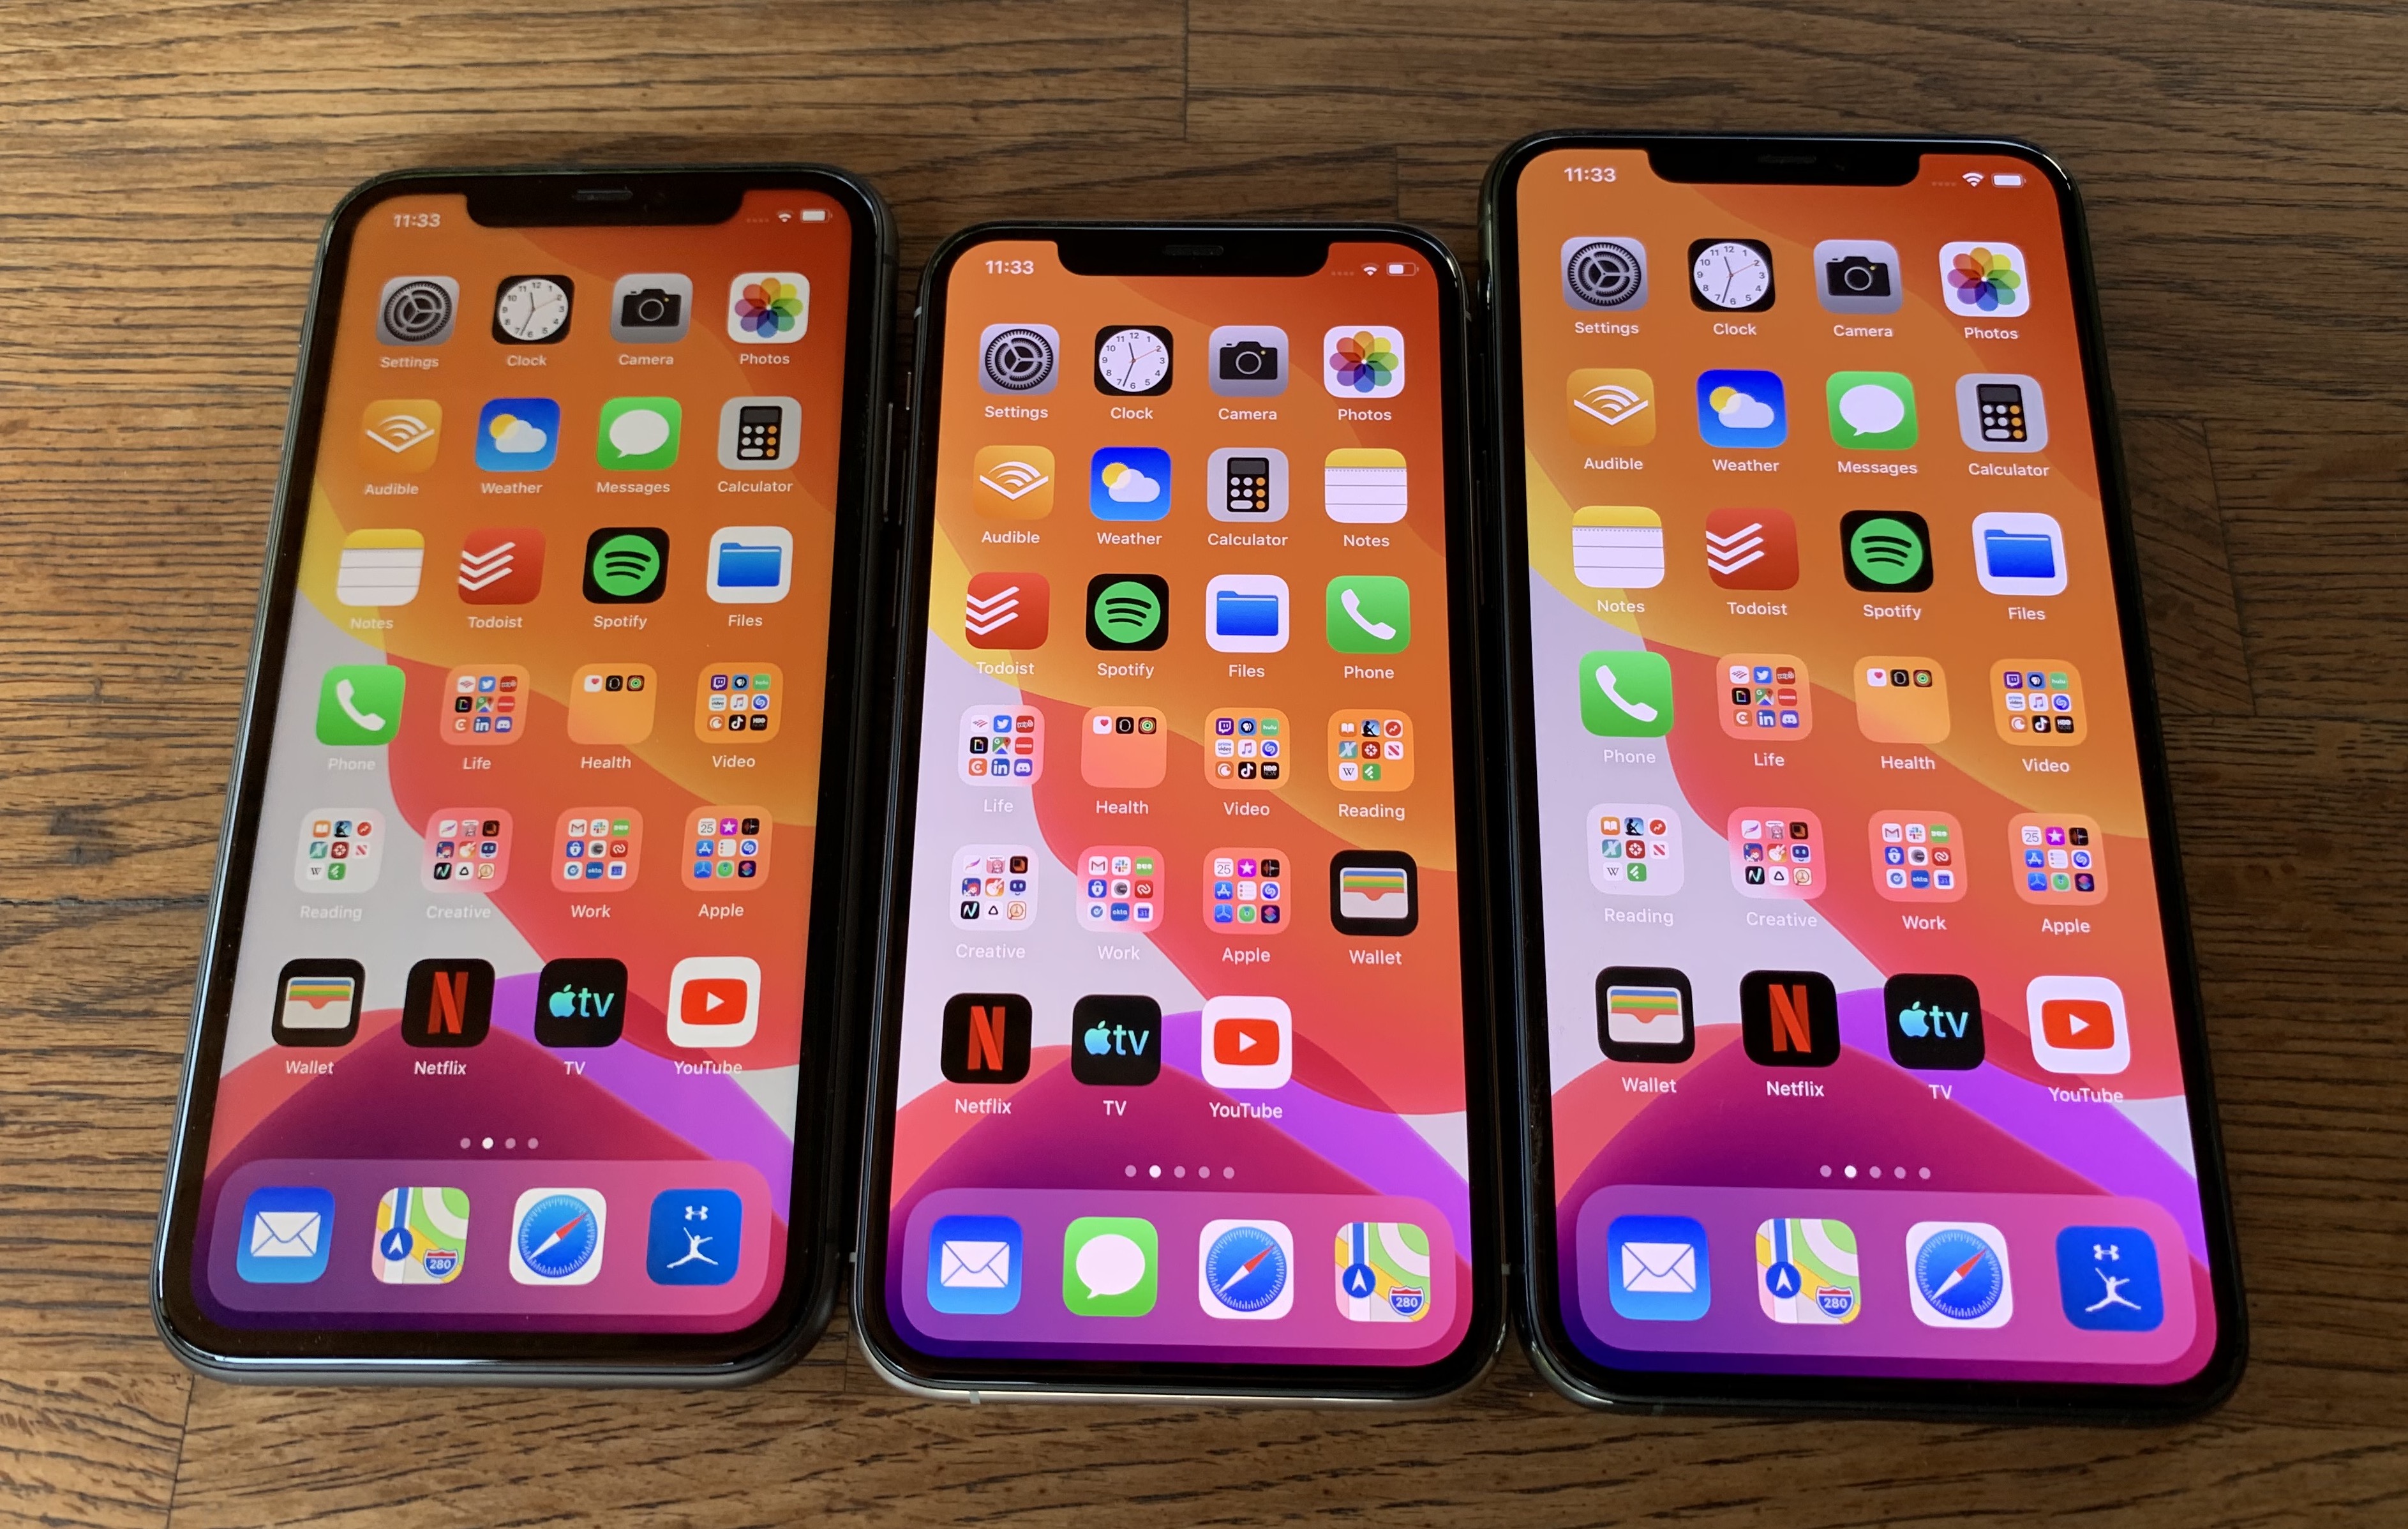 iOS 13.1.1 and iOS 13.1.2: Apple takes an aggressive update cadence to